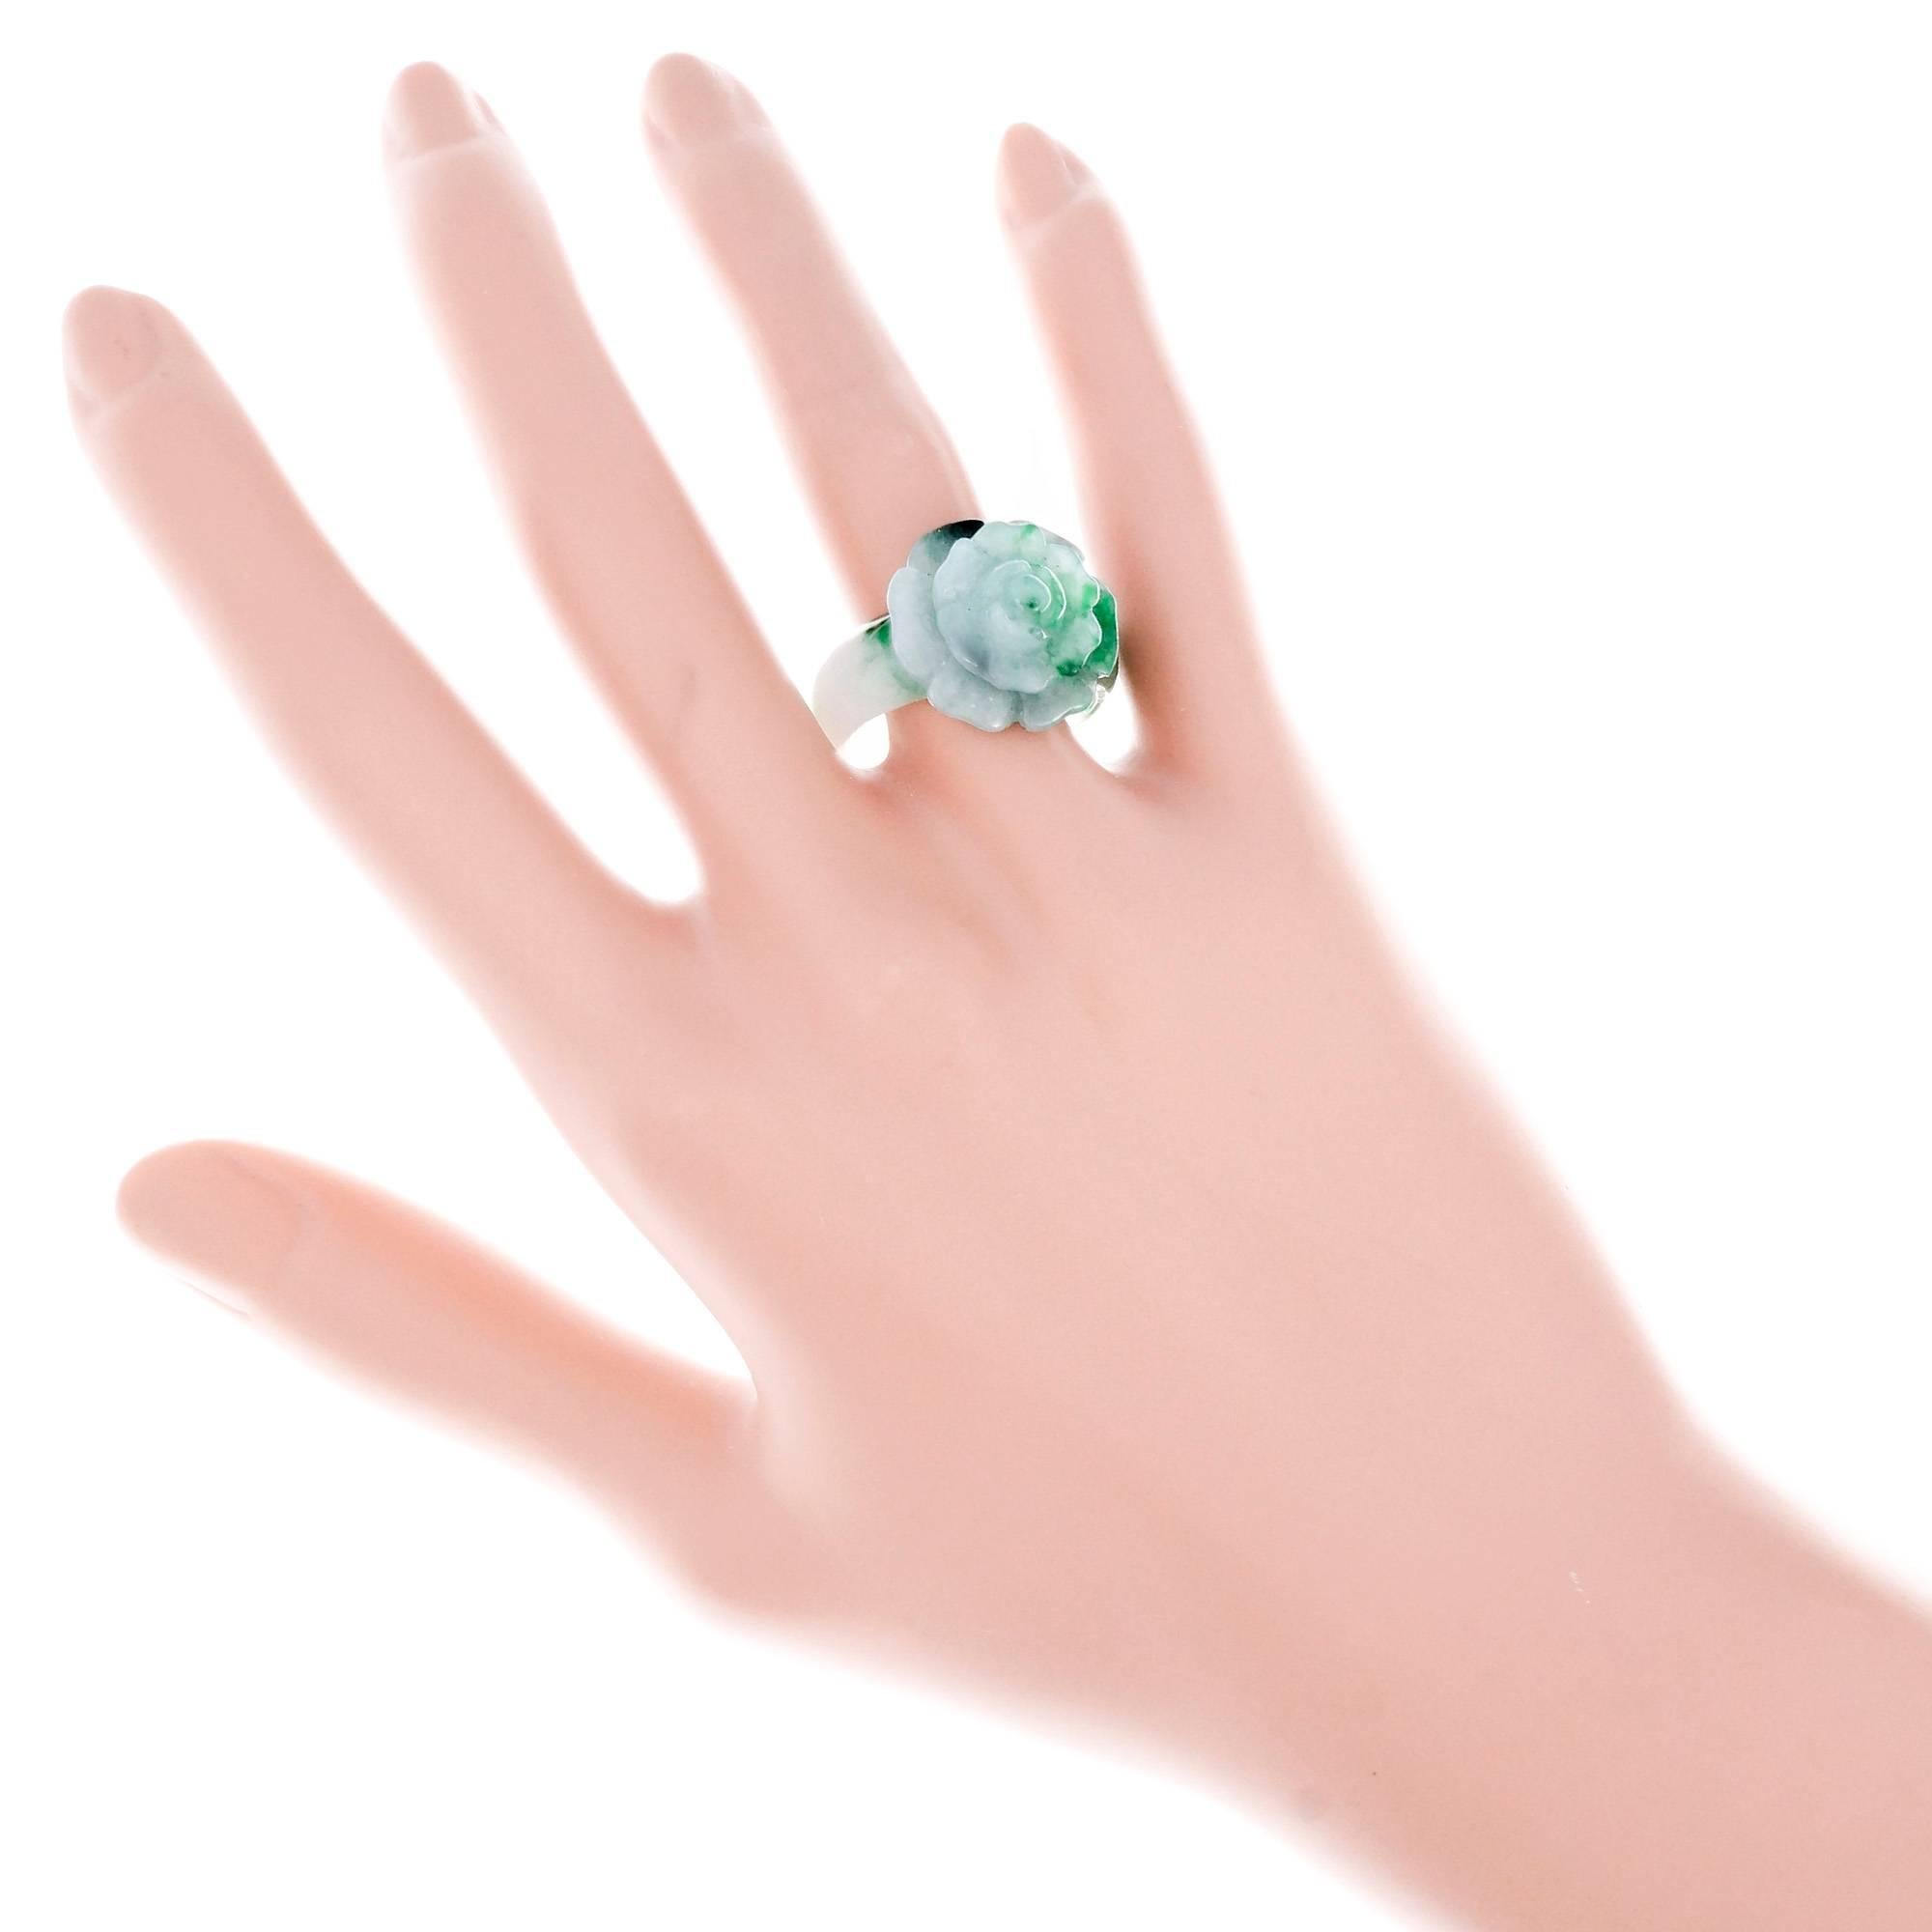 Natural Jadeite Jade blended green, white and dark green color flower ring. Translucent GIA certified natural Jadeite Jade 

1 carved variegated dark green & white Jadeite Jade, approx. total weight 35.06cts, GIA certificate #1182600523
Size 10 and